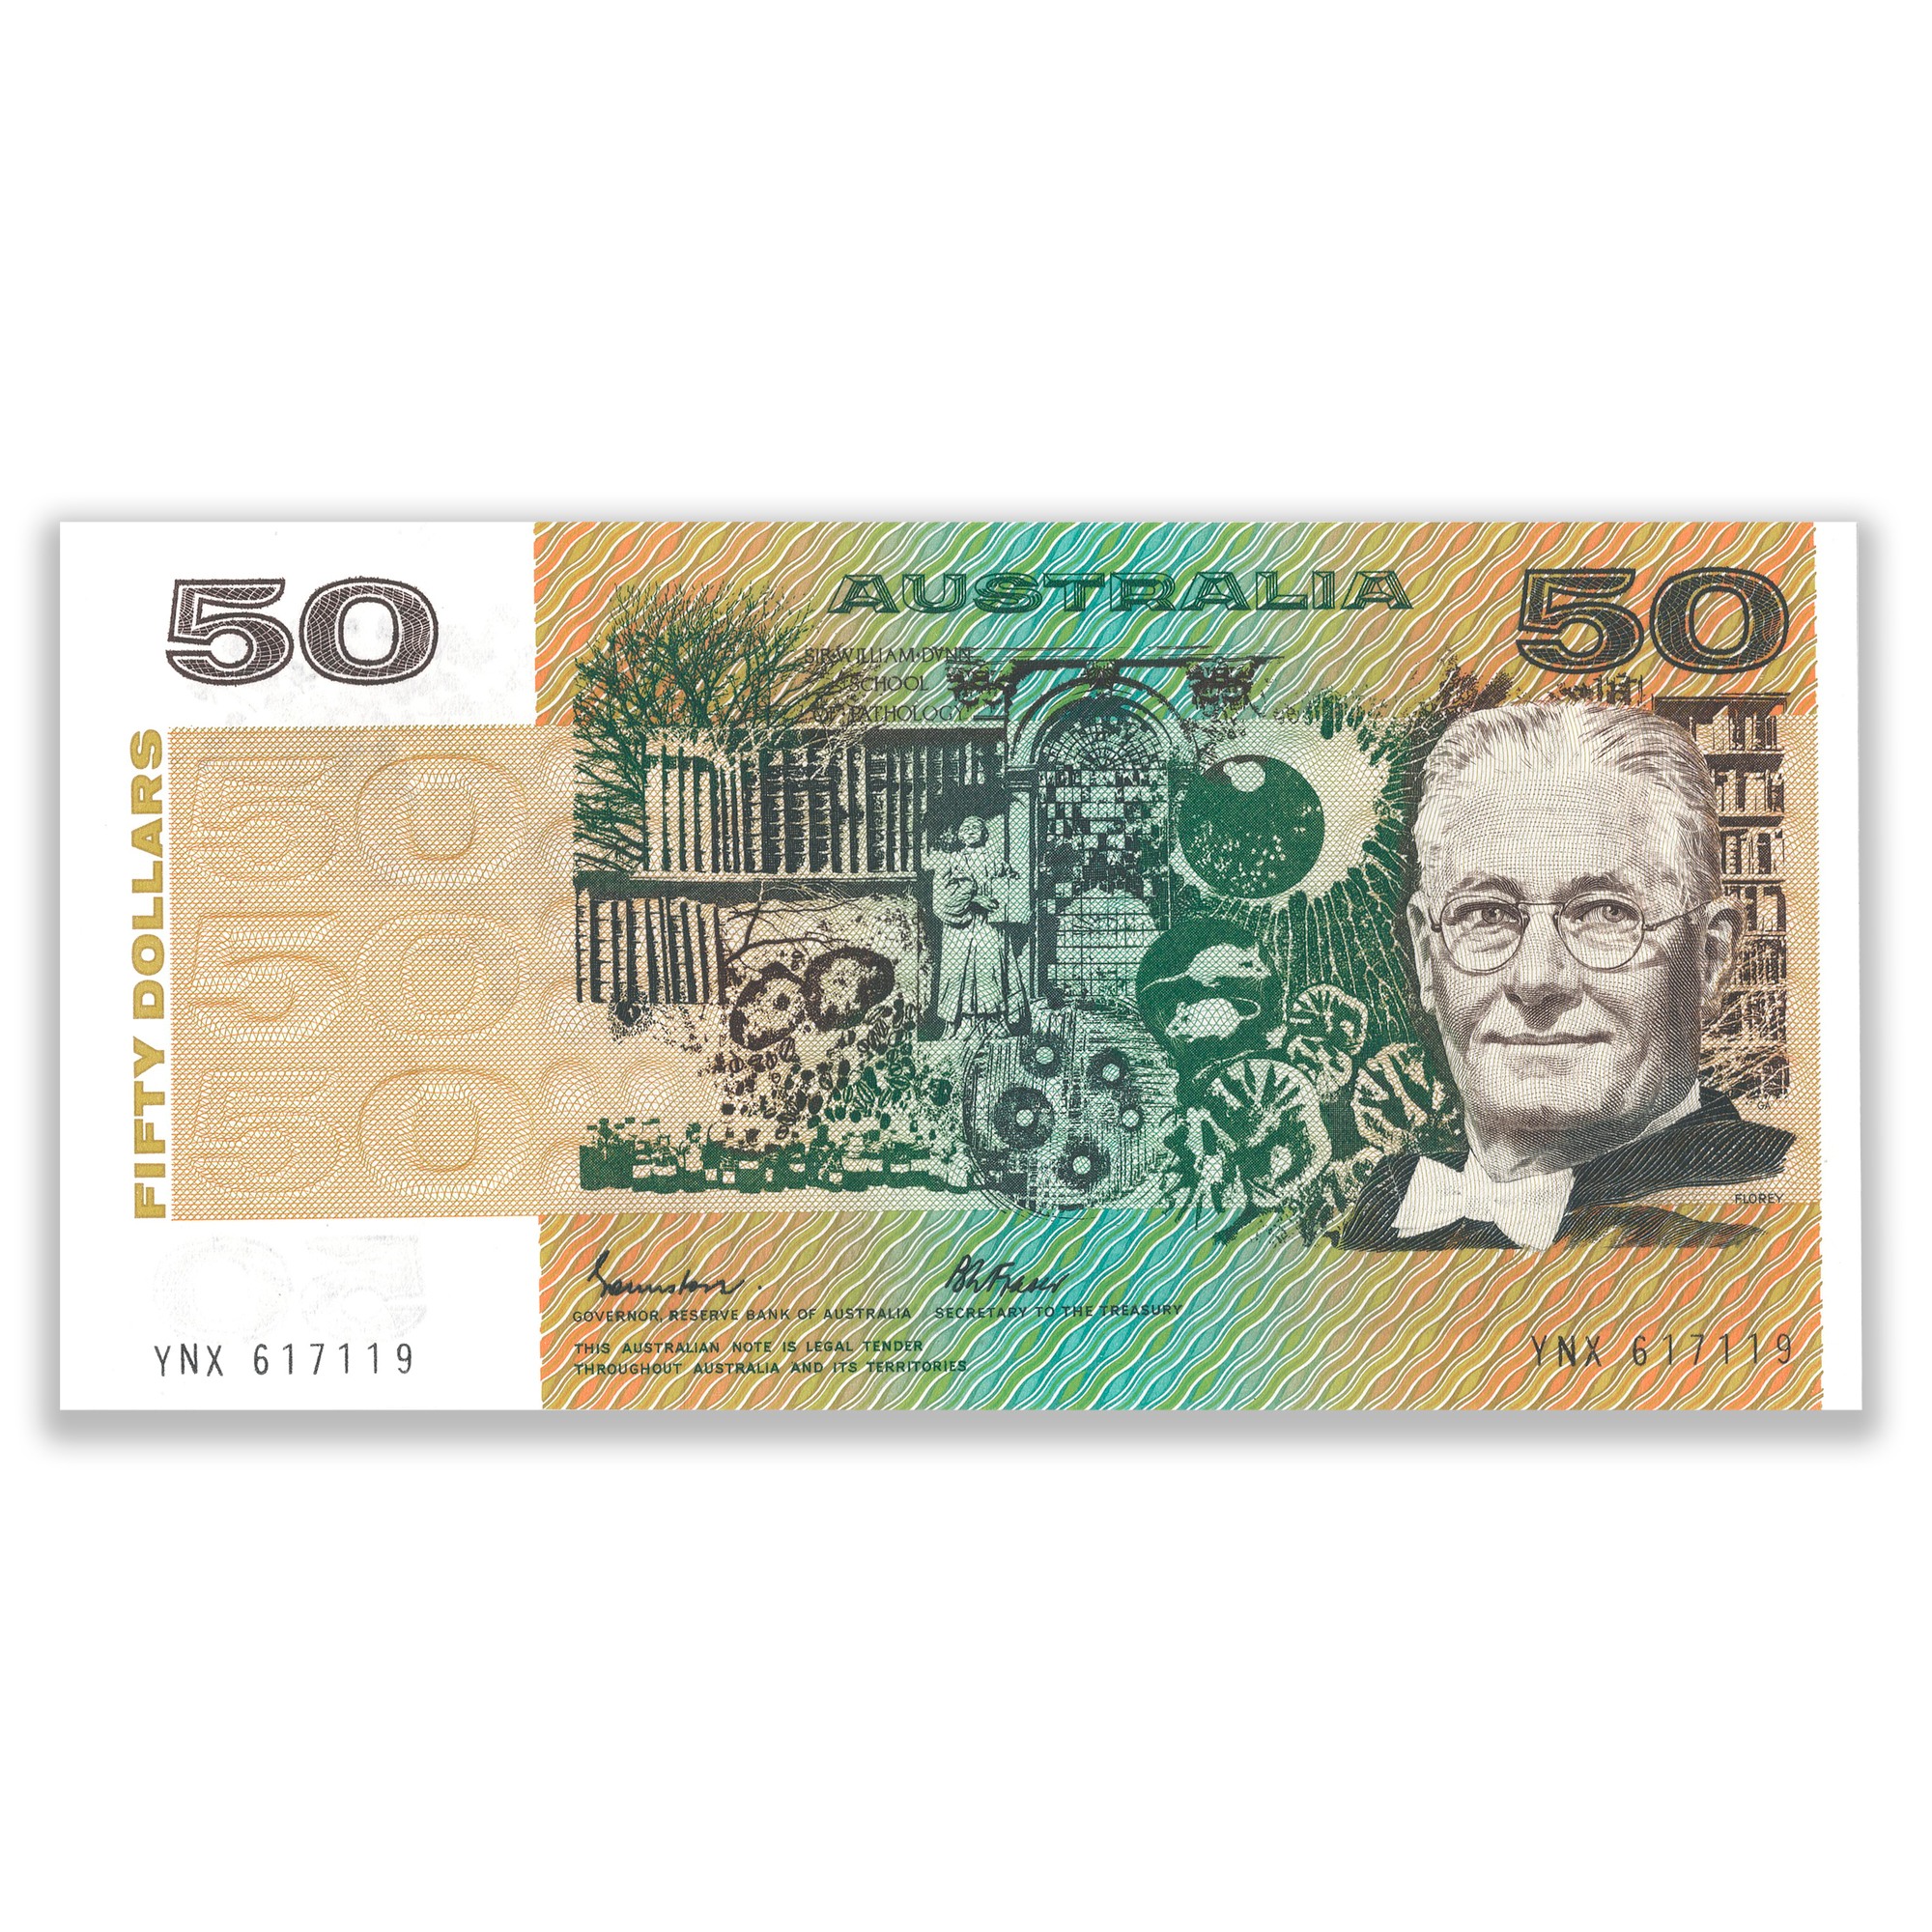 R509a 1985 $50 Banknote Uncirculated